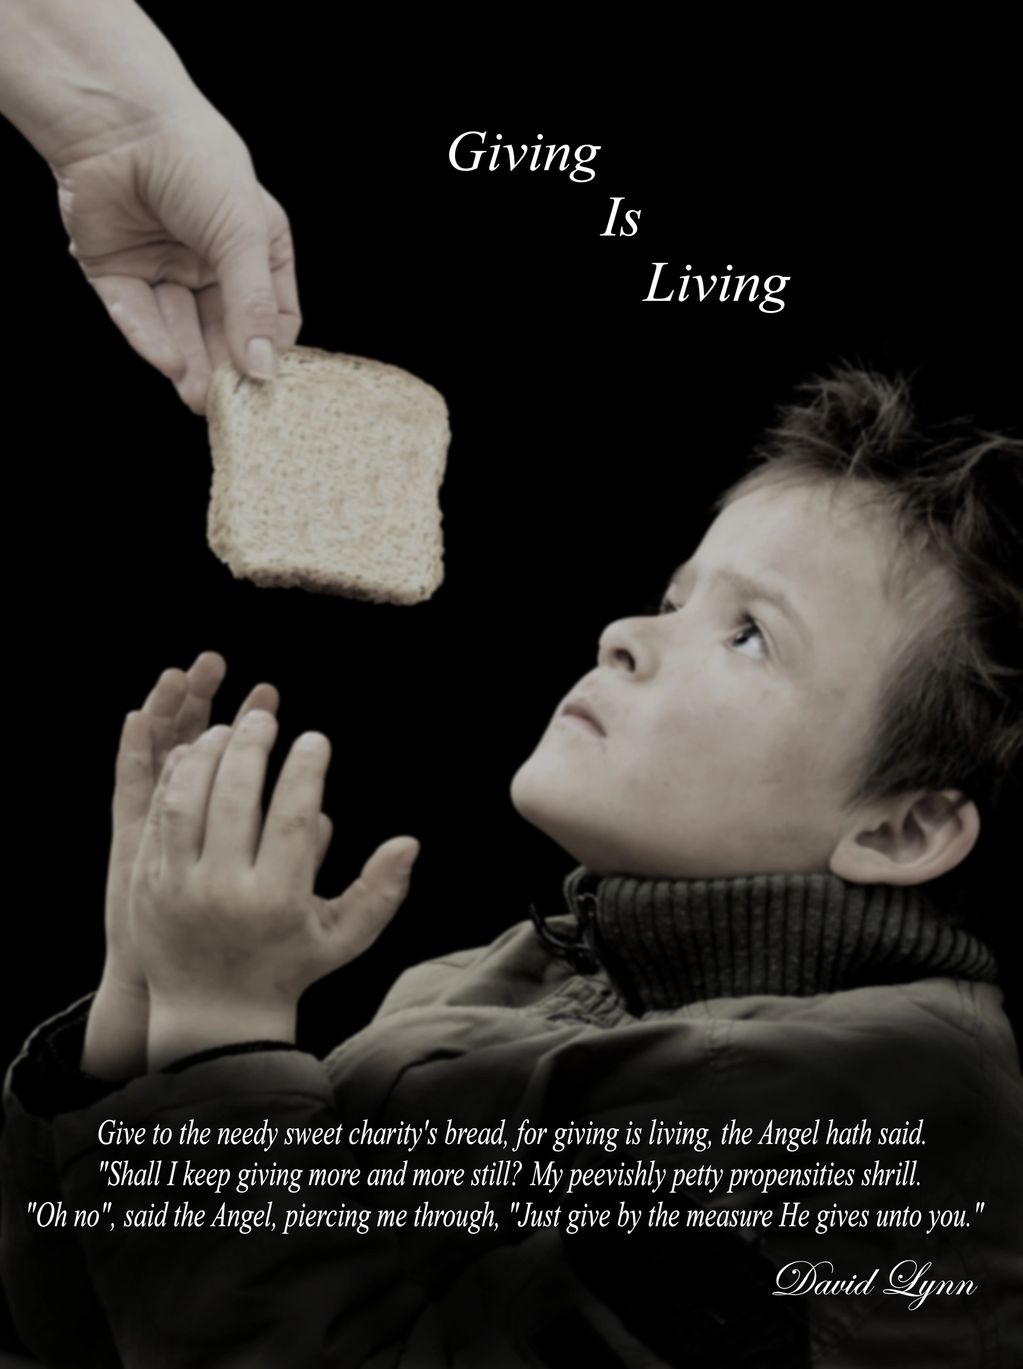 “Giving is Living” 